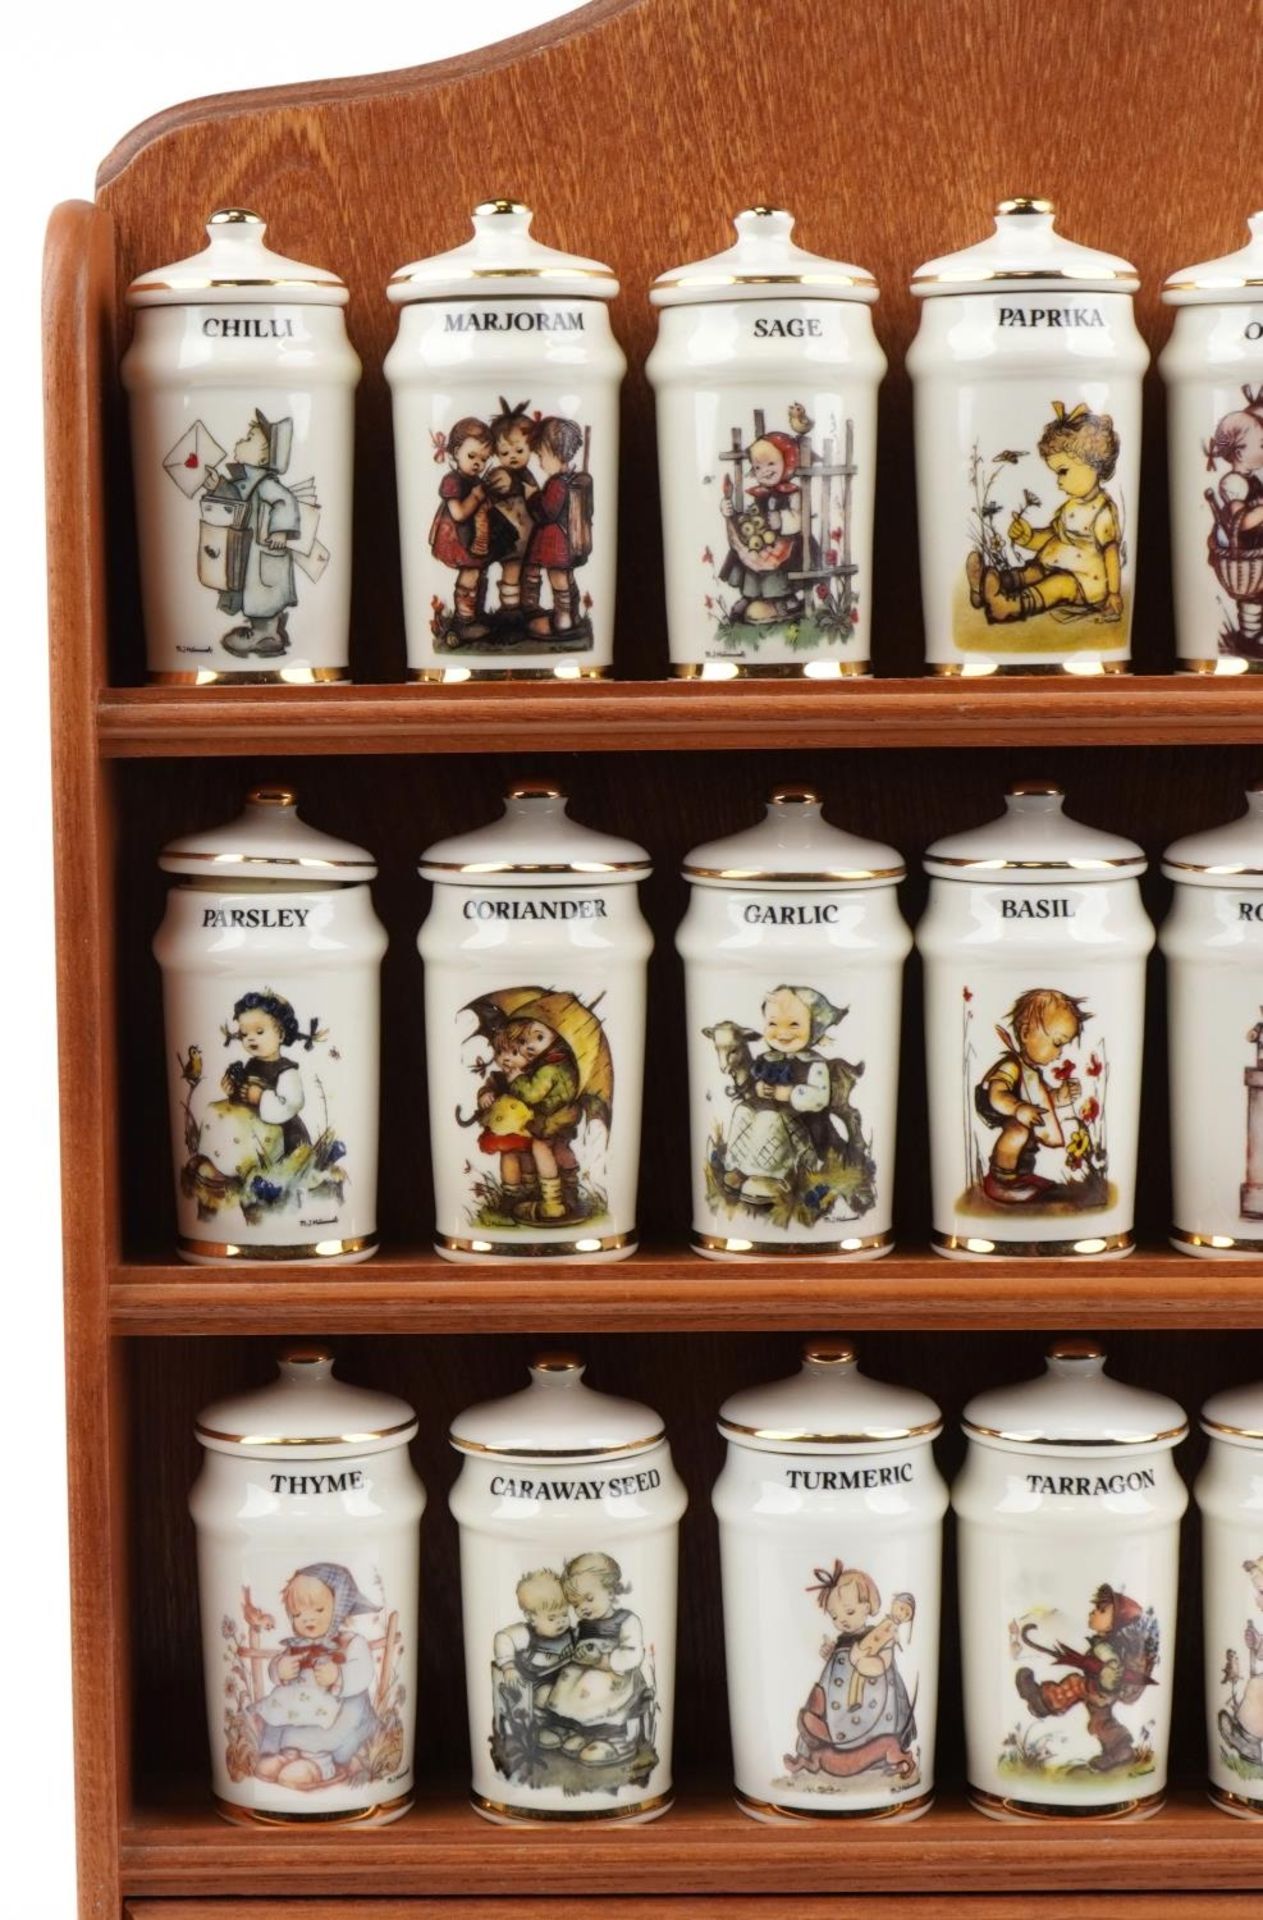 Collection of M J Hummel porcelain spice jars and covers arranged in a lightwood spice rack, each - Image 2 of 5